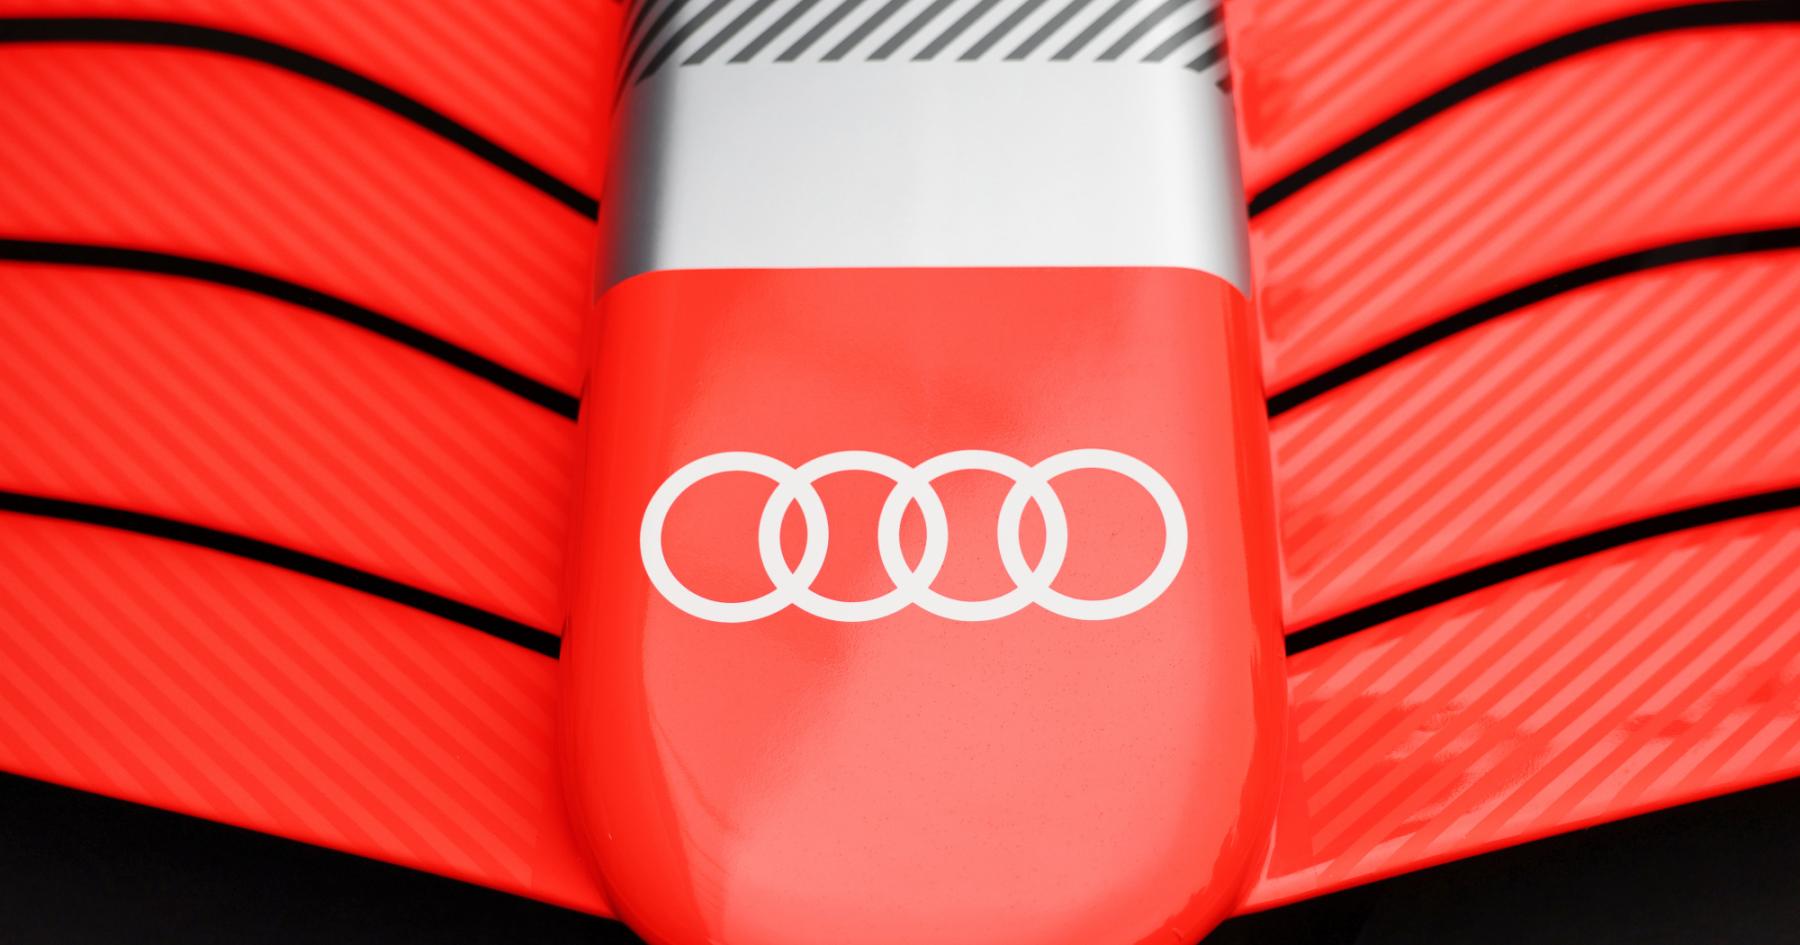 Revving Towards Victory: Audi's F1 Project Gains Momentum with Promising Developments